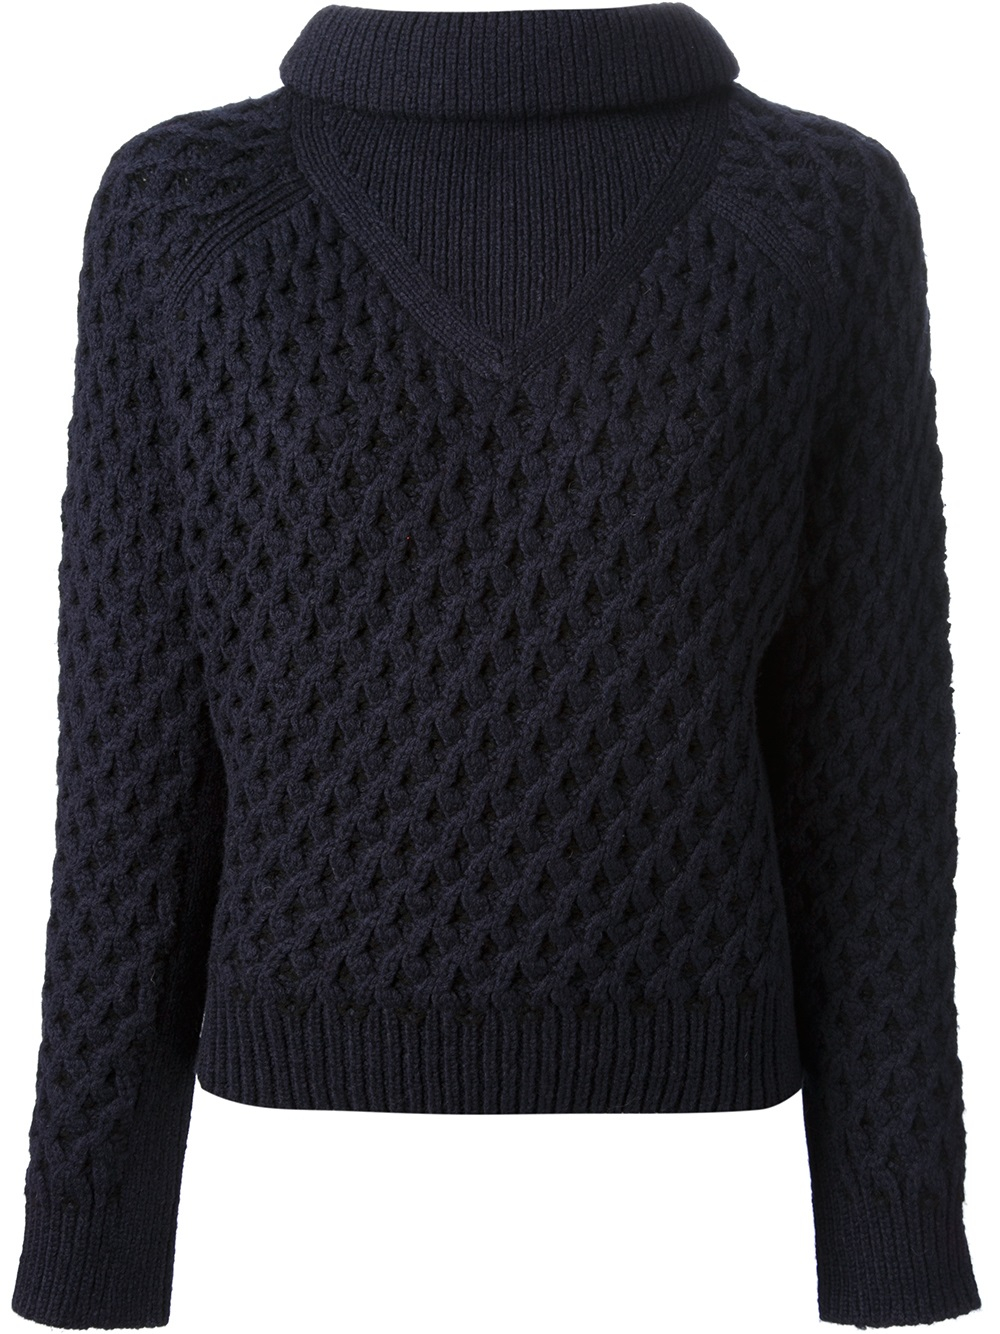 Carven Cropped Cable Knit Jumper in Blue | Lyst